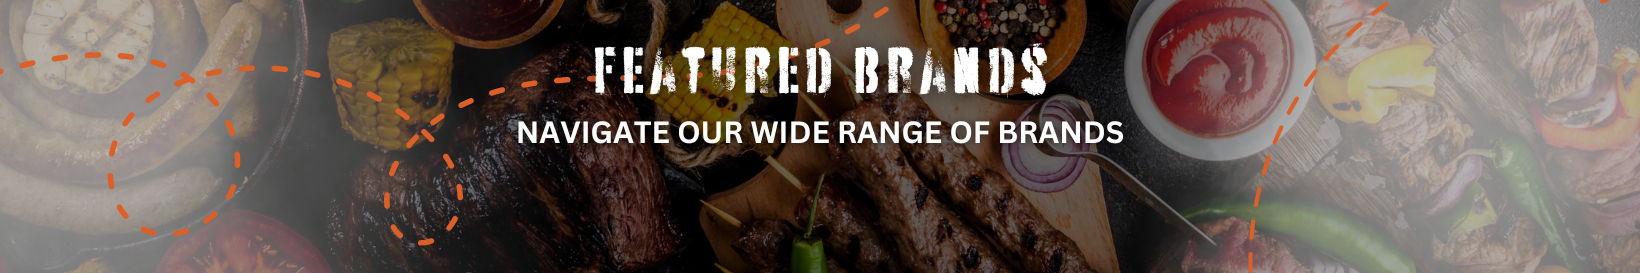 best place to buy australian barbecues from top rated brands bbq 